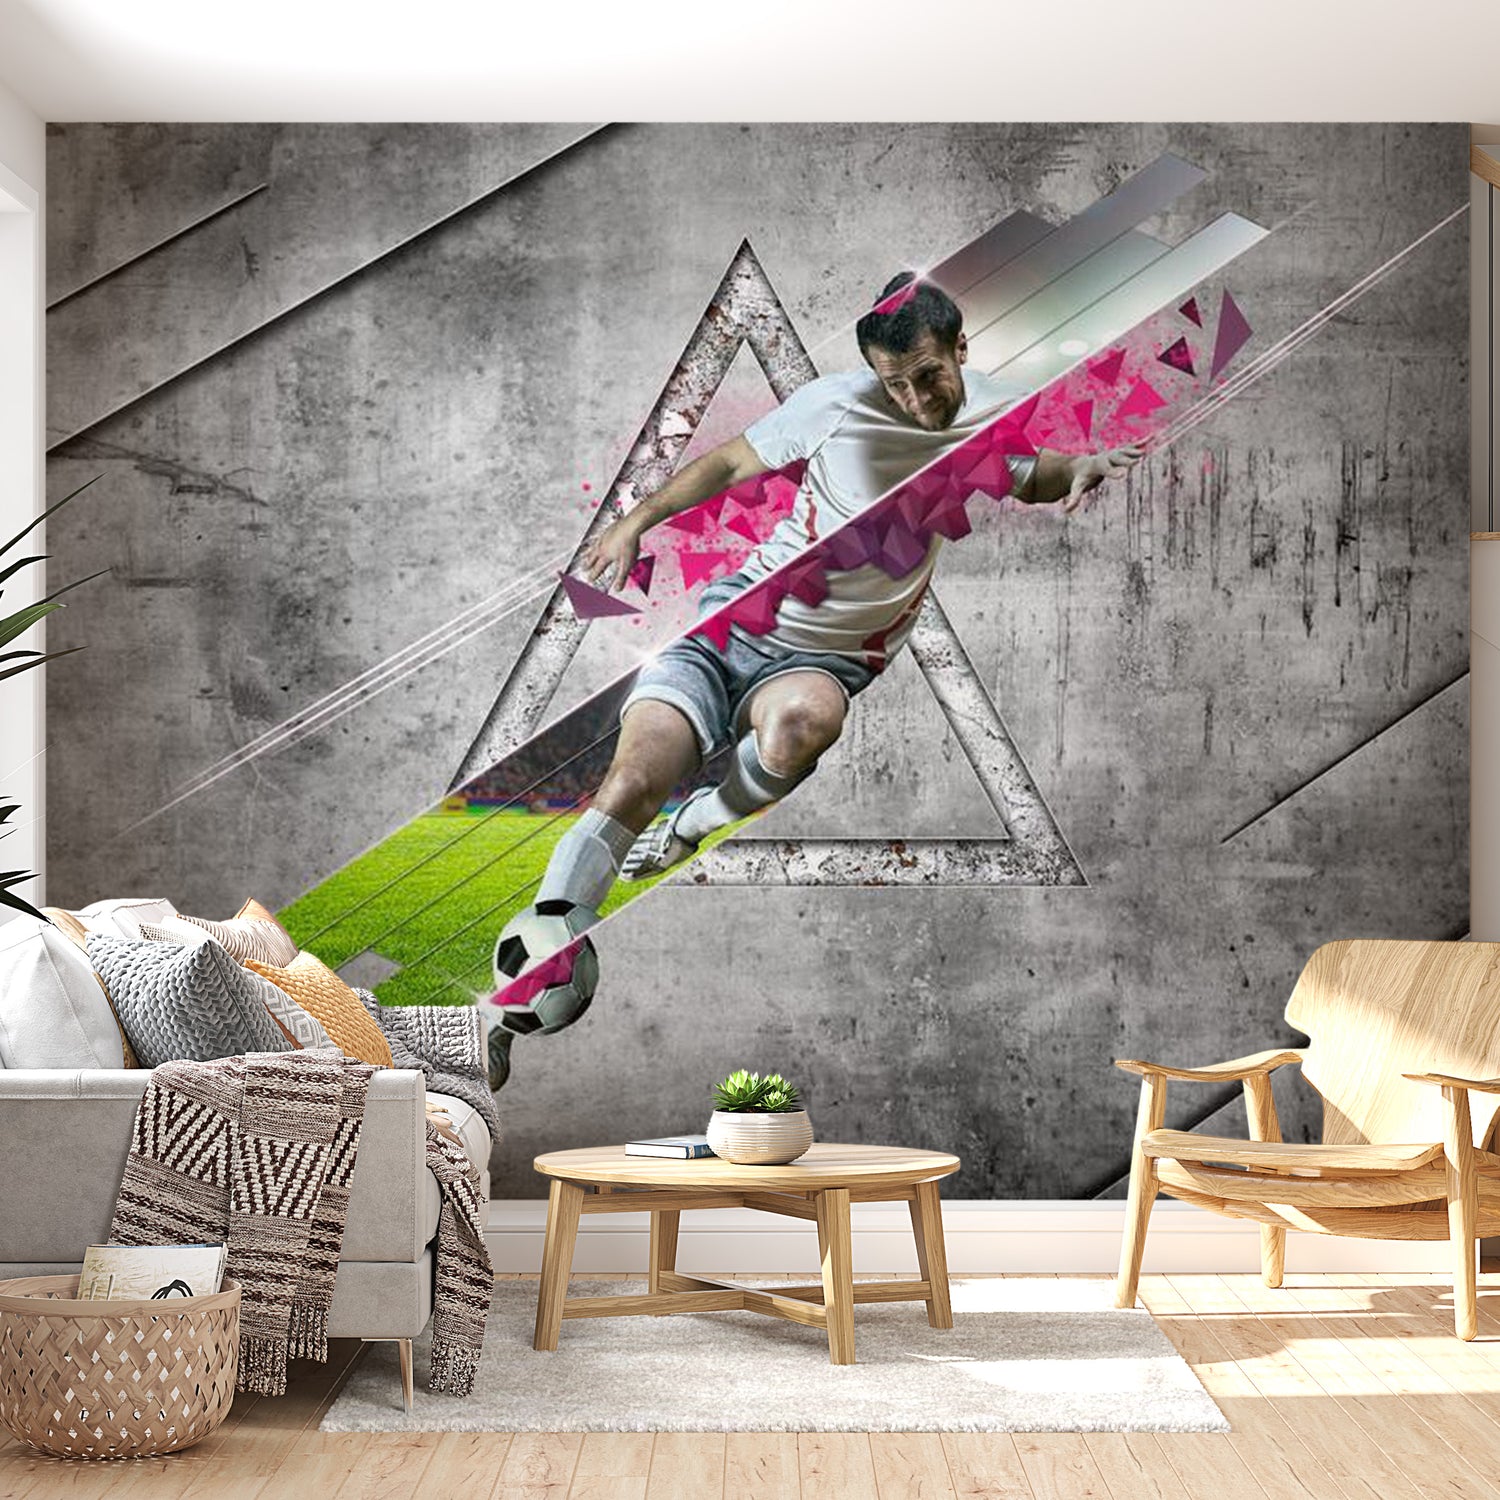 Peel & Stick Football Wall Mural - Soccer Art - Removable Wall Decals